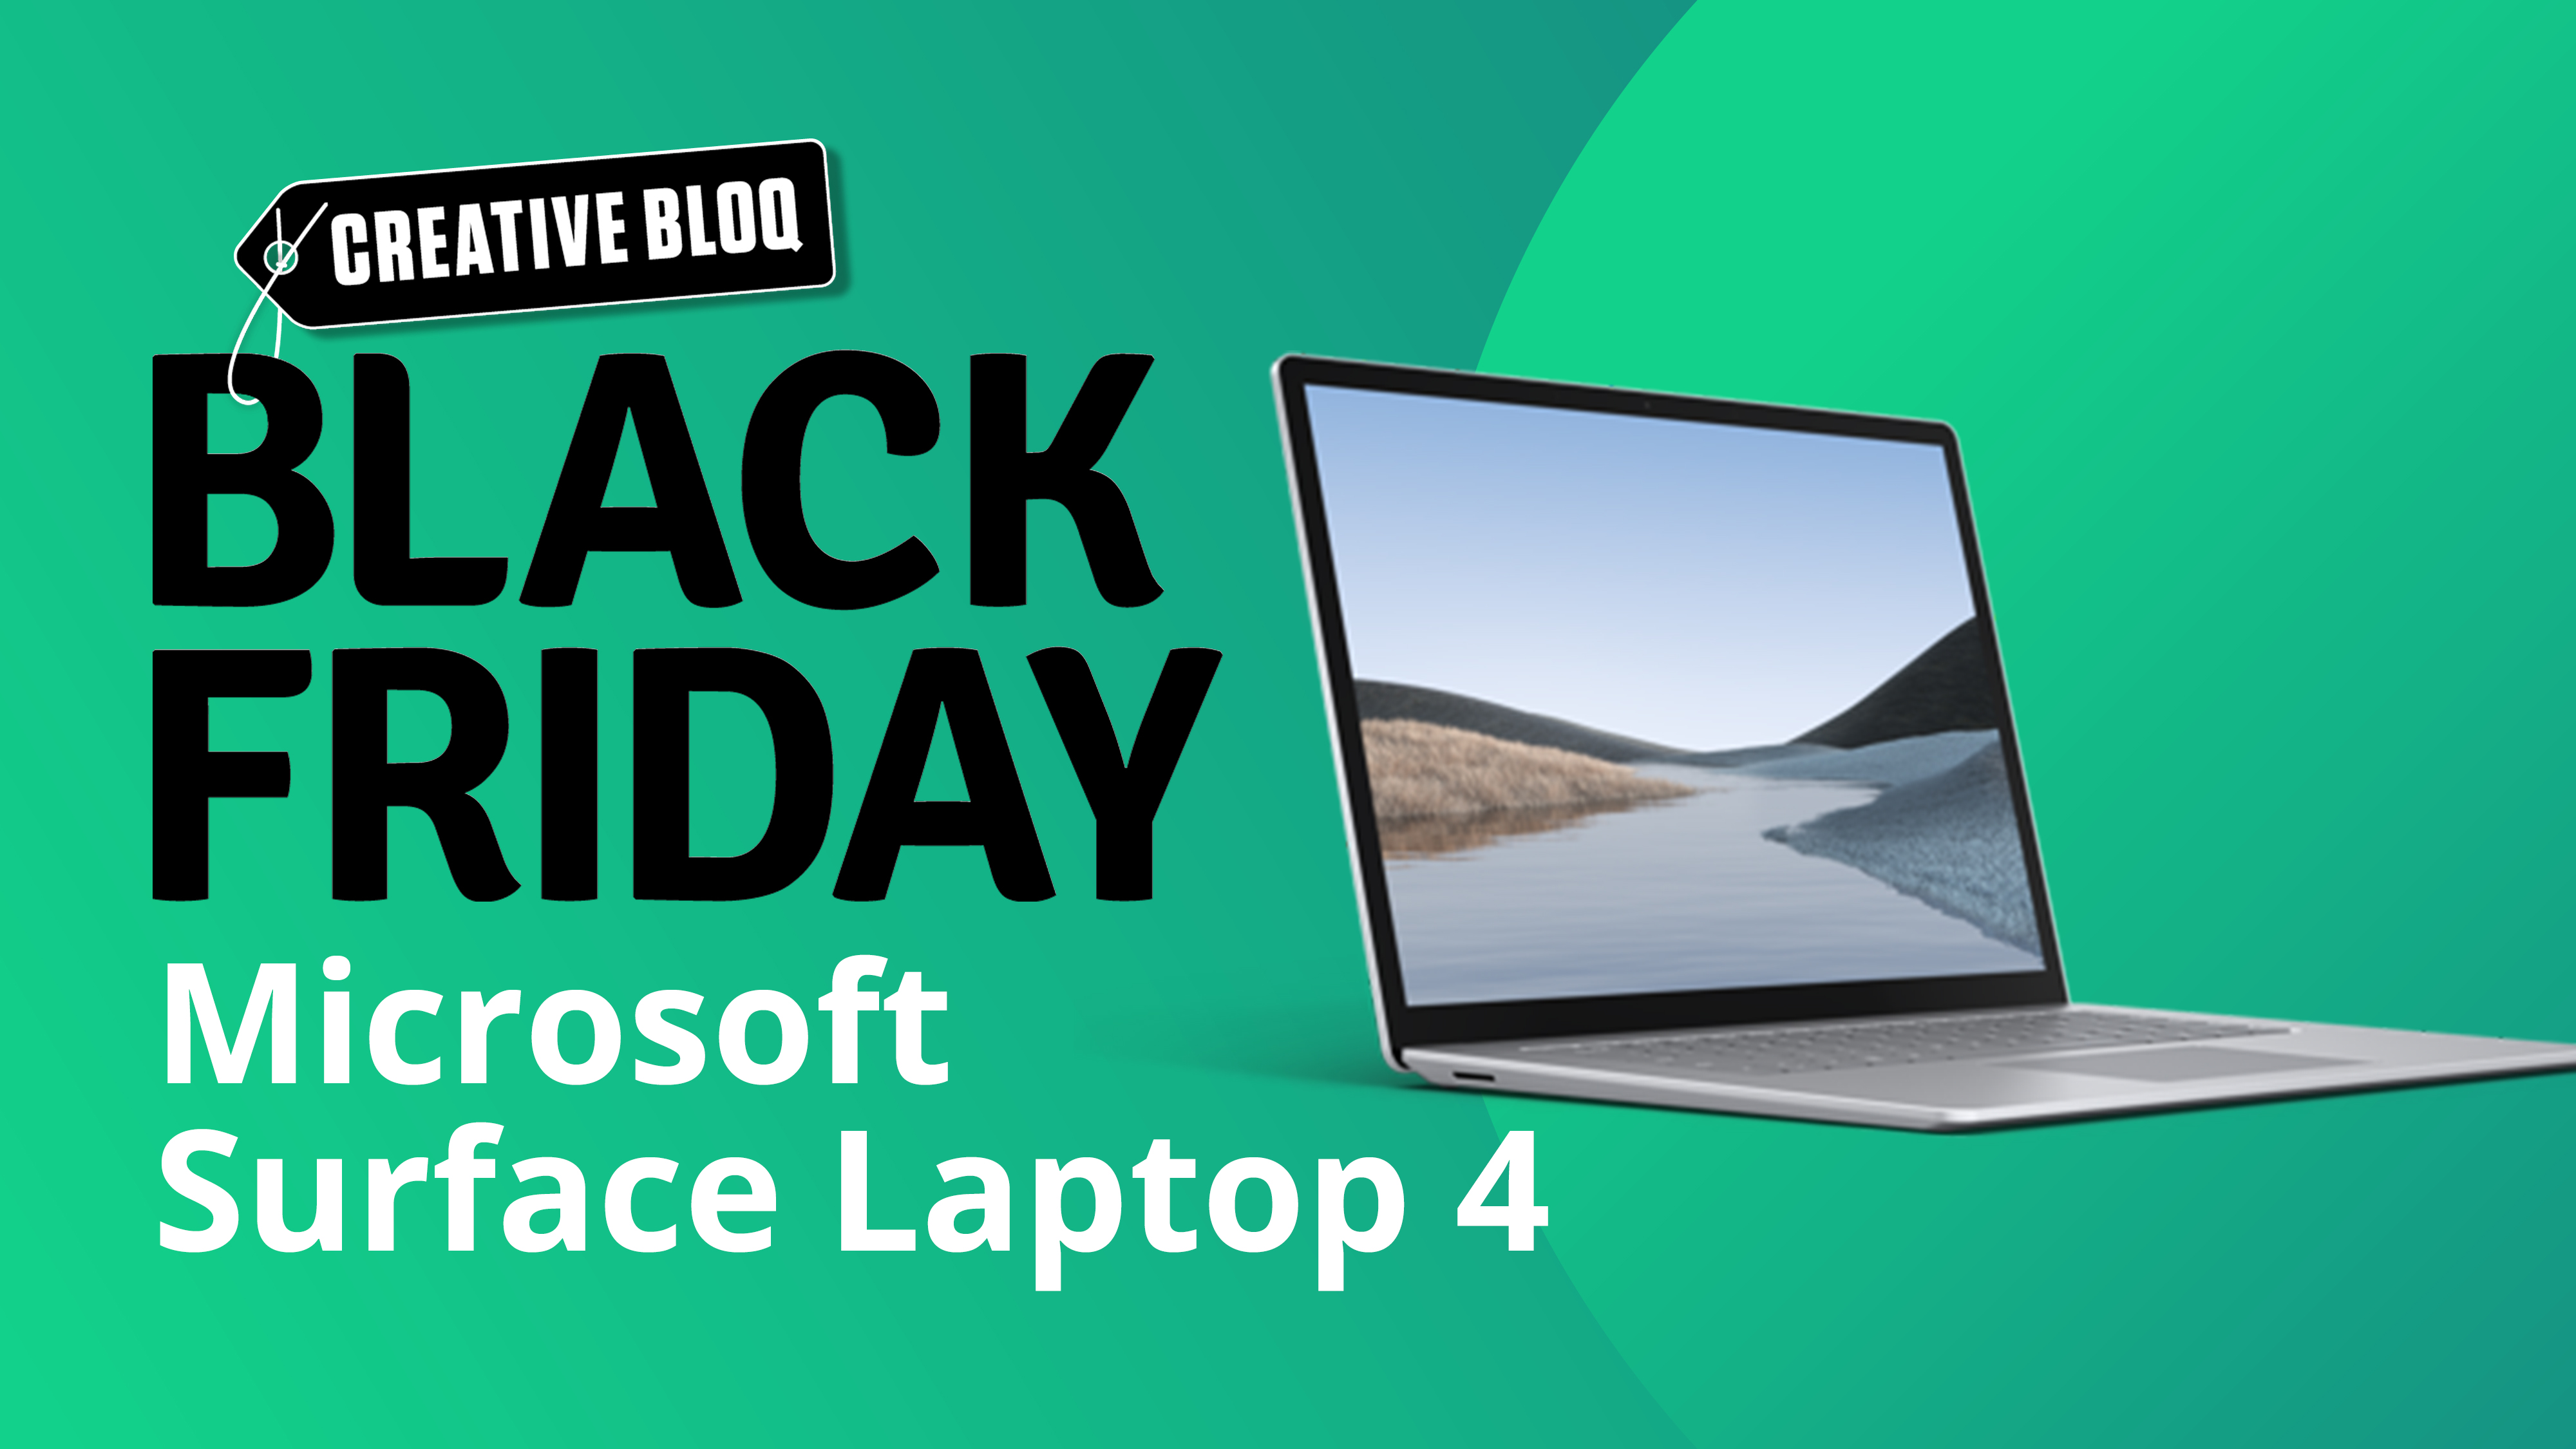 Microsoft Surface Black Friday deal image, with Microsoft Surface Laptop 4 on a green background